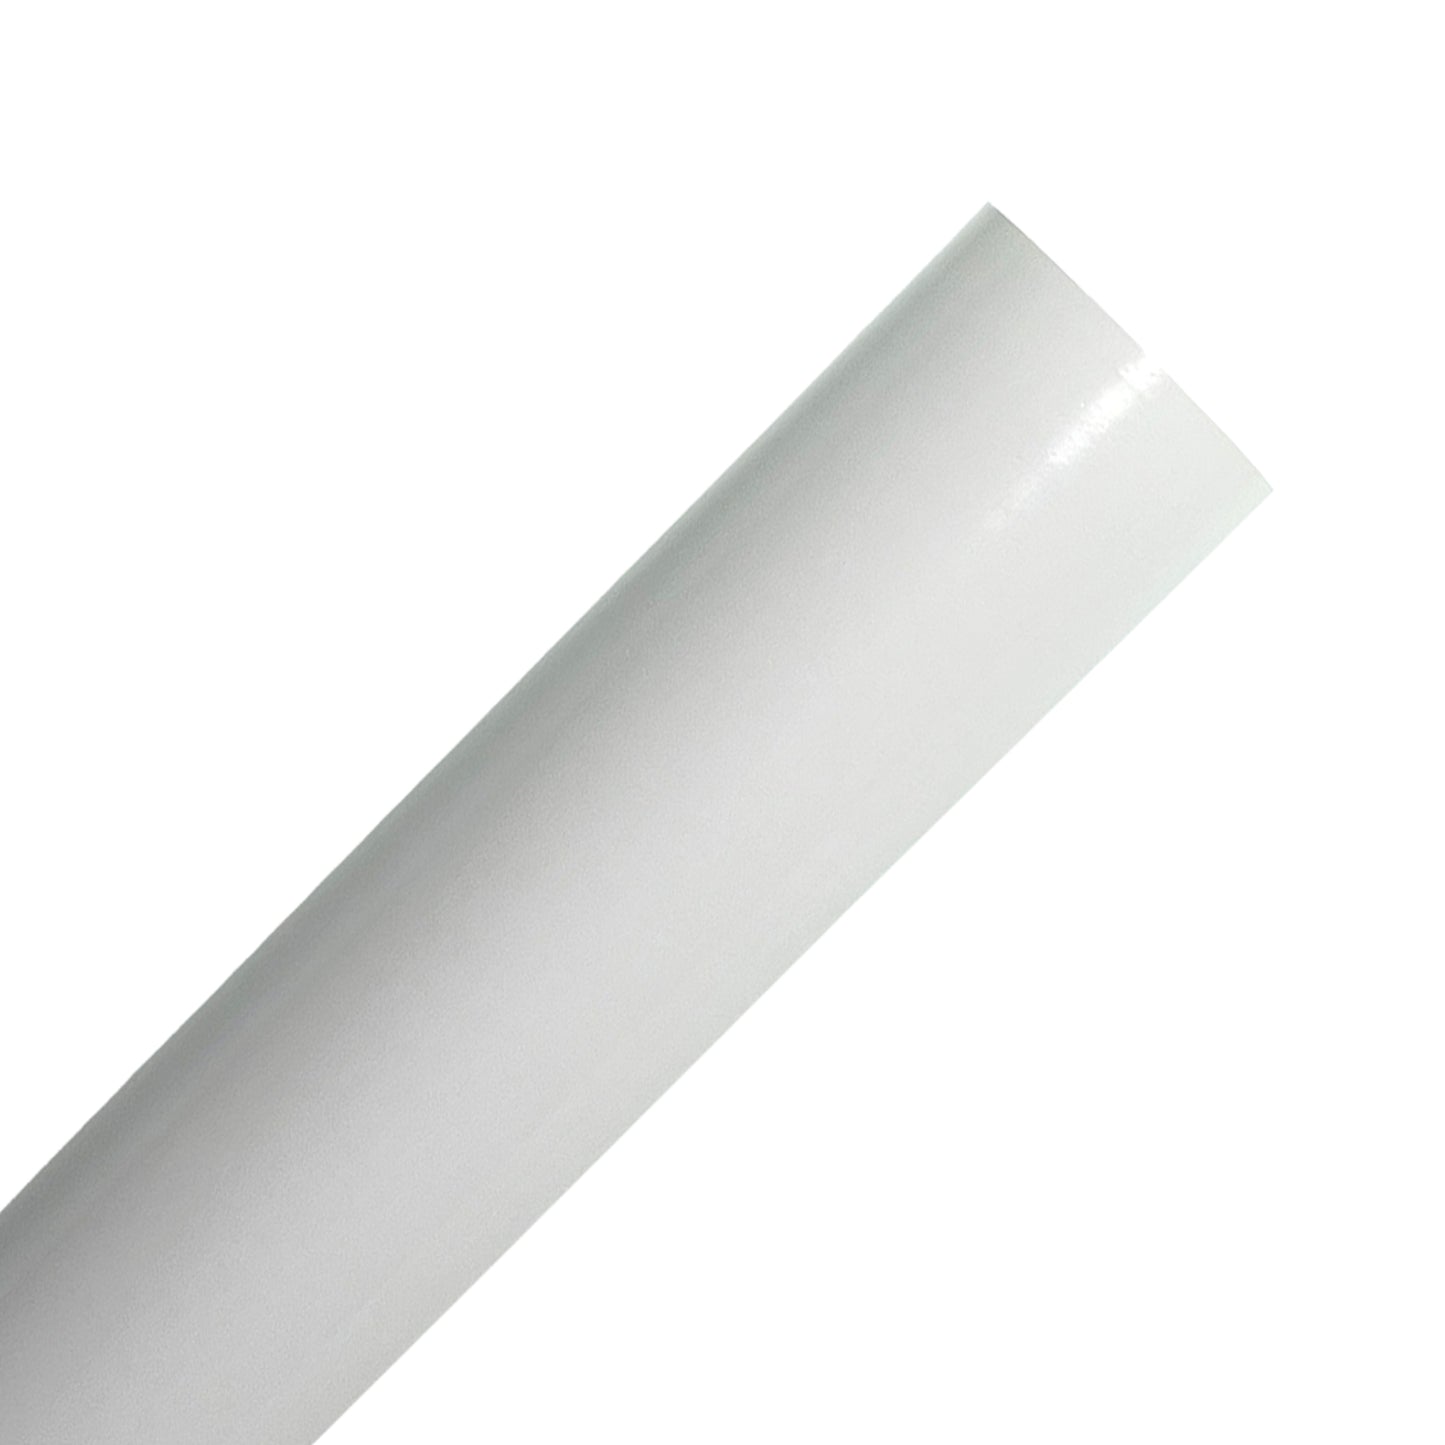 White Adhesive Vinyl Rolls By Craftables